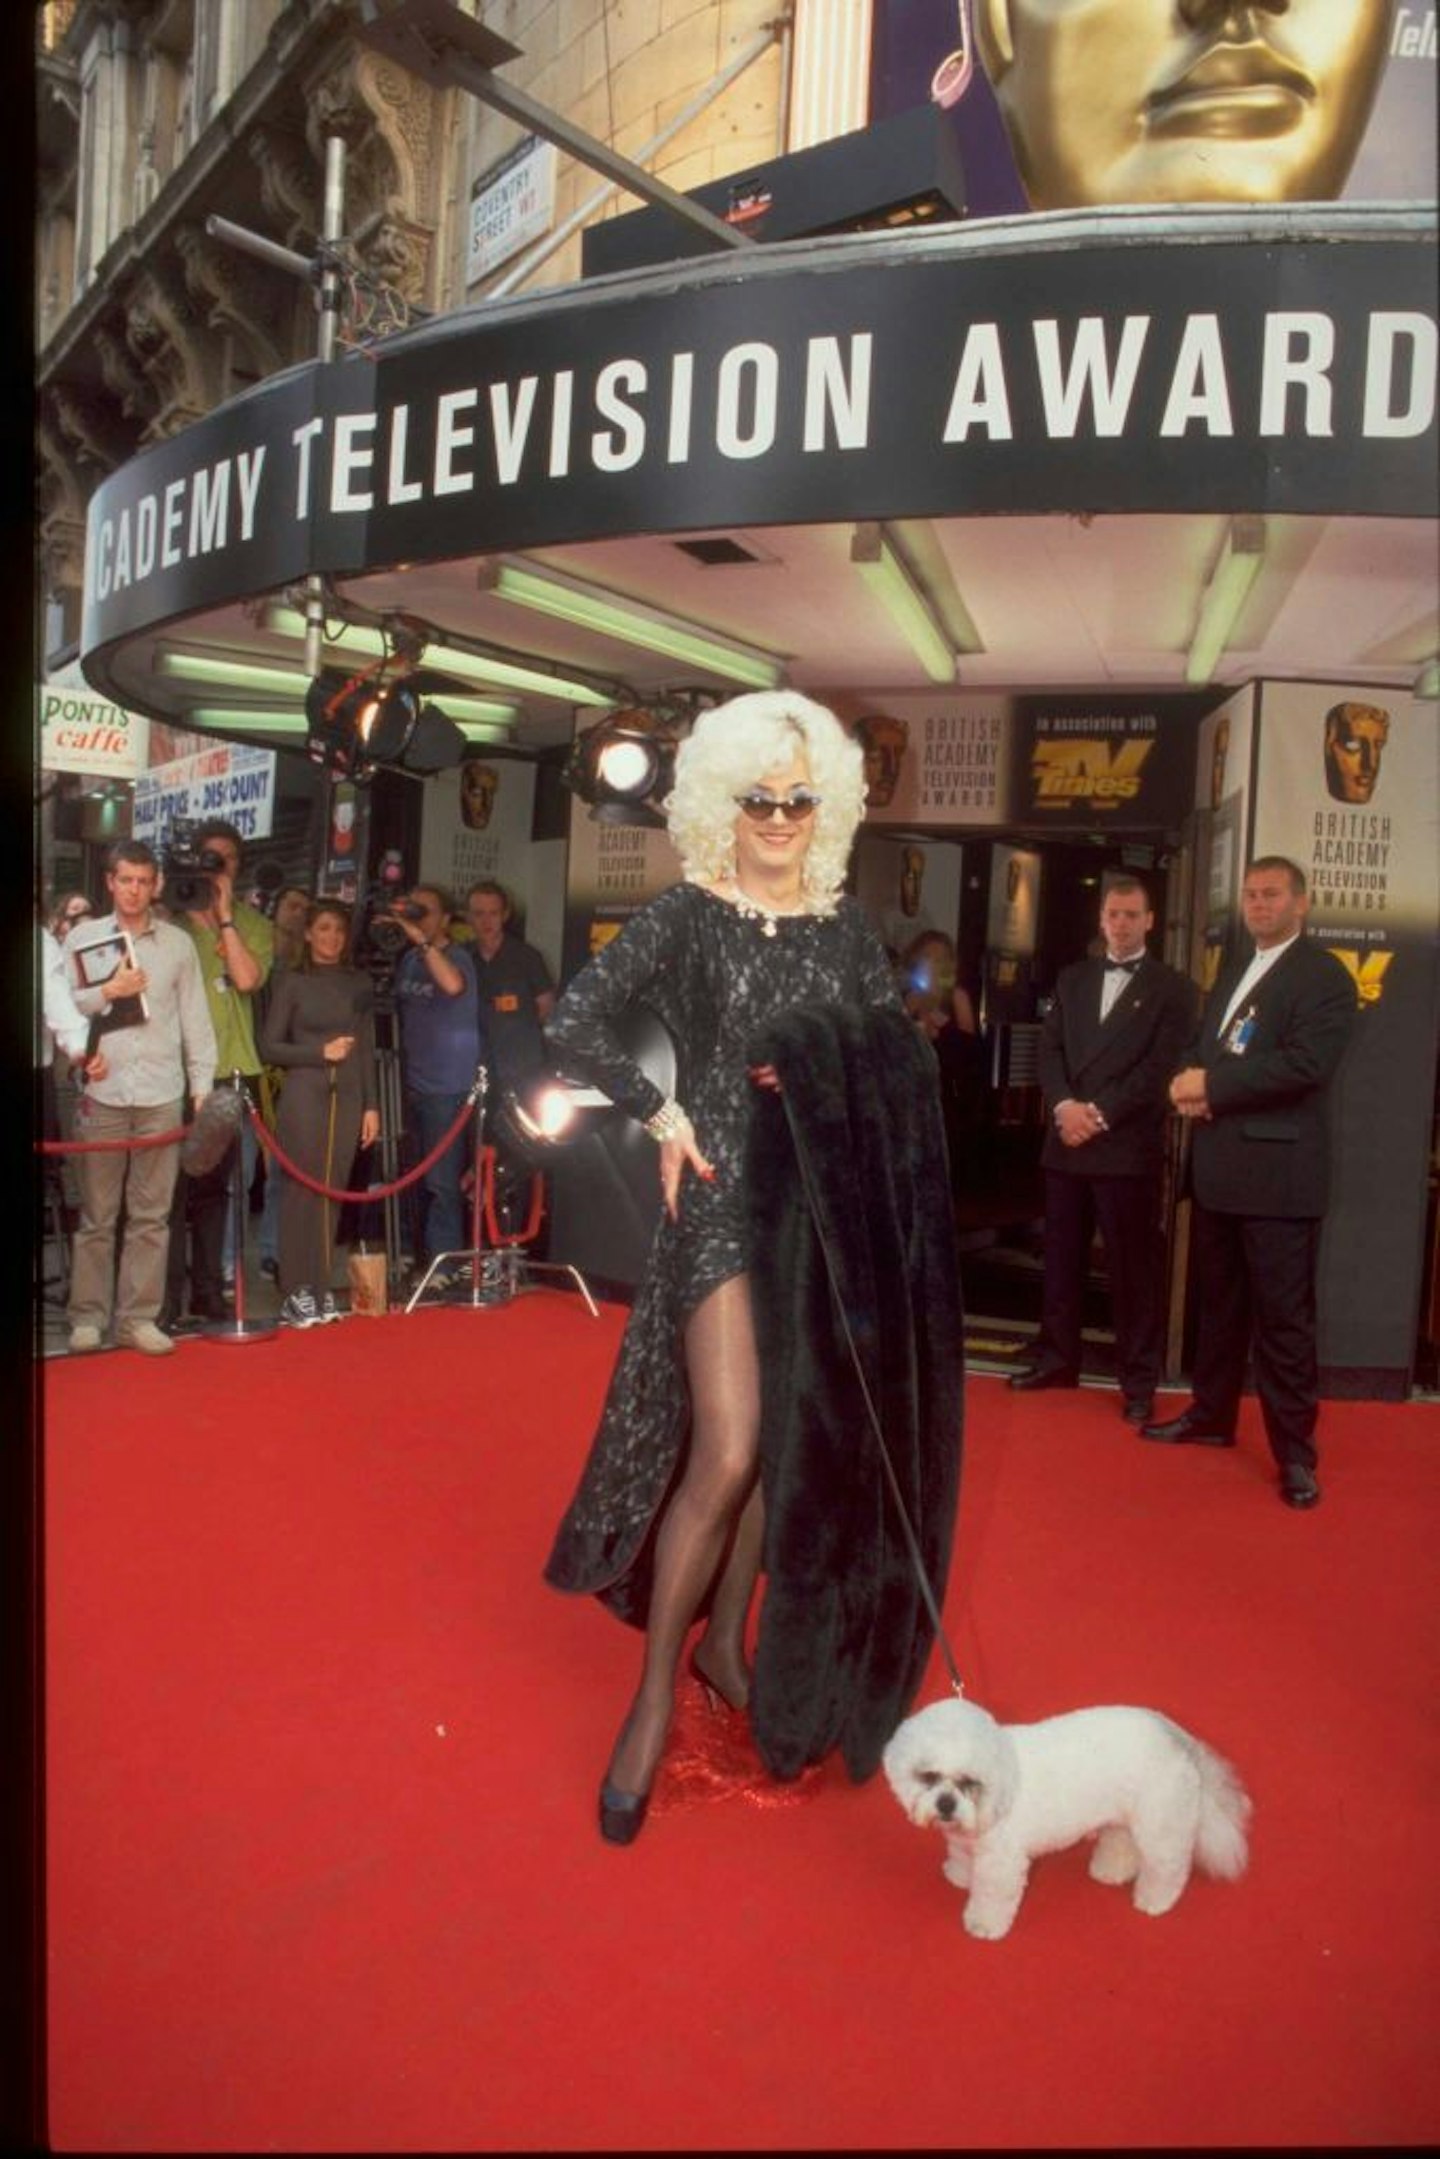 Lily posing on red carpet with dog